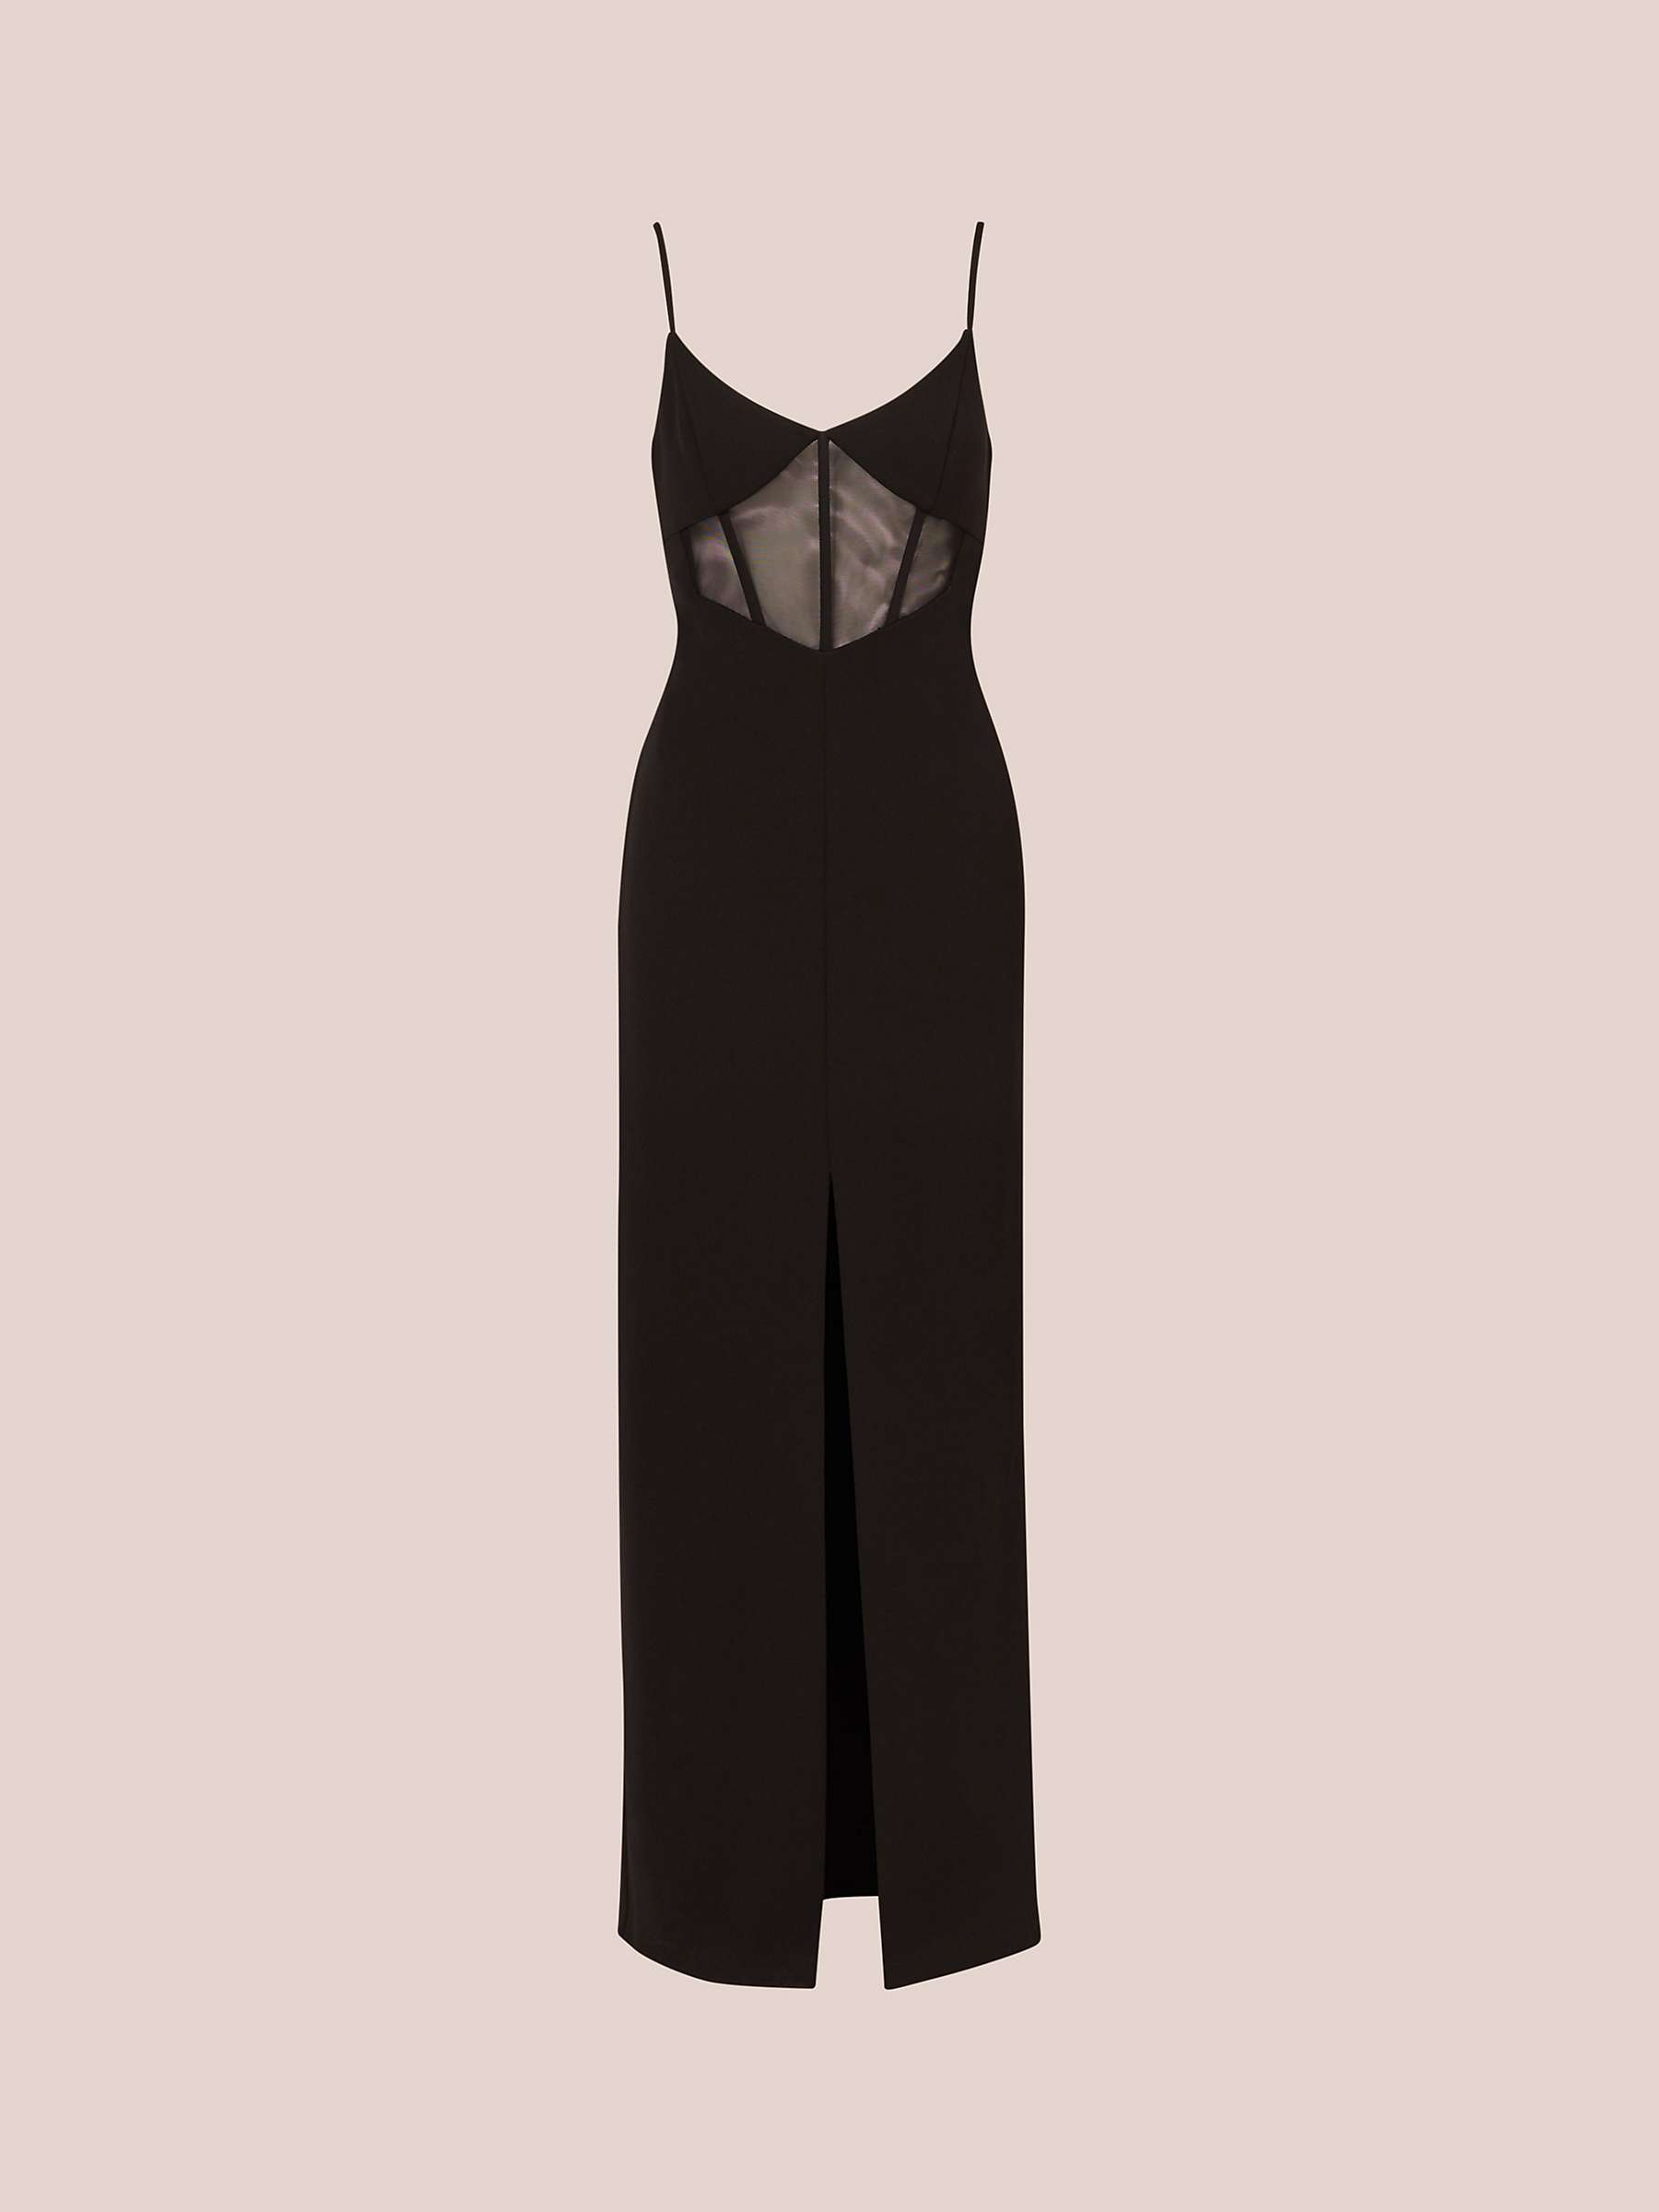 Buy Adrianna by Adrianna Papell Knit Crepe Column Maxi Dress, Black Online at johnlewis.com